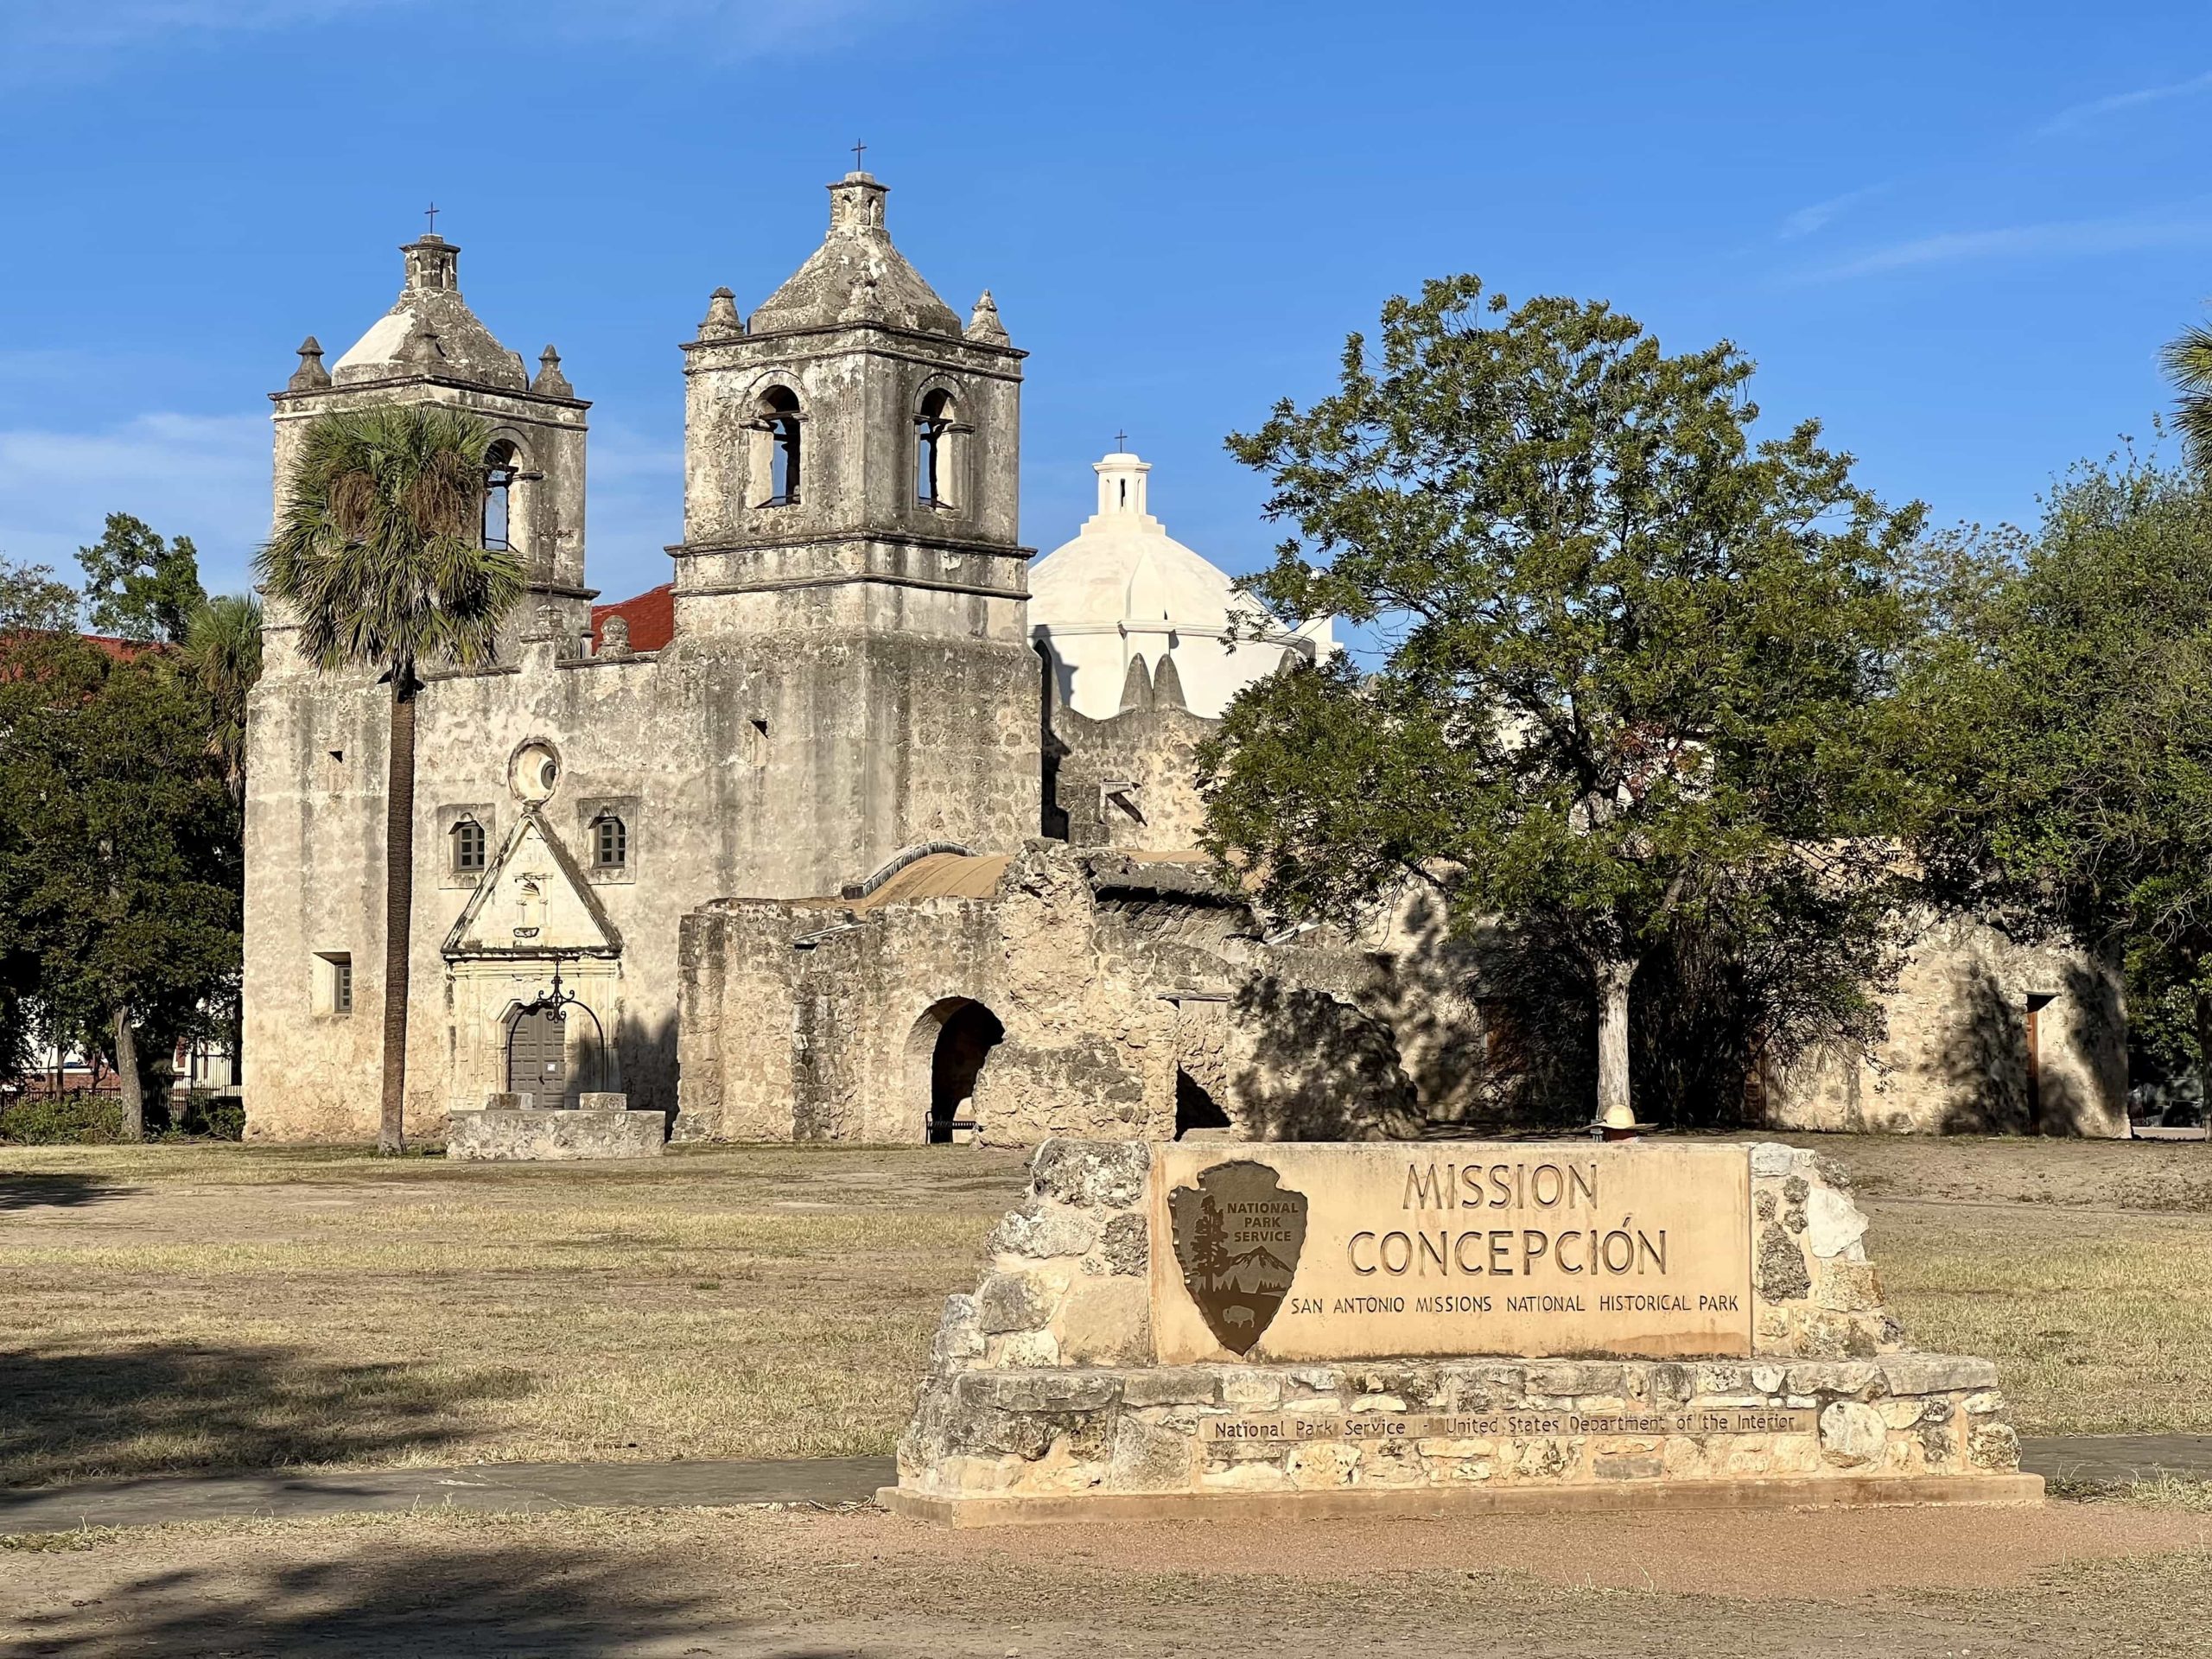 The church of Mission Concepción in San Antonio, with the National Parks sign out front